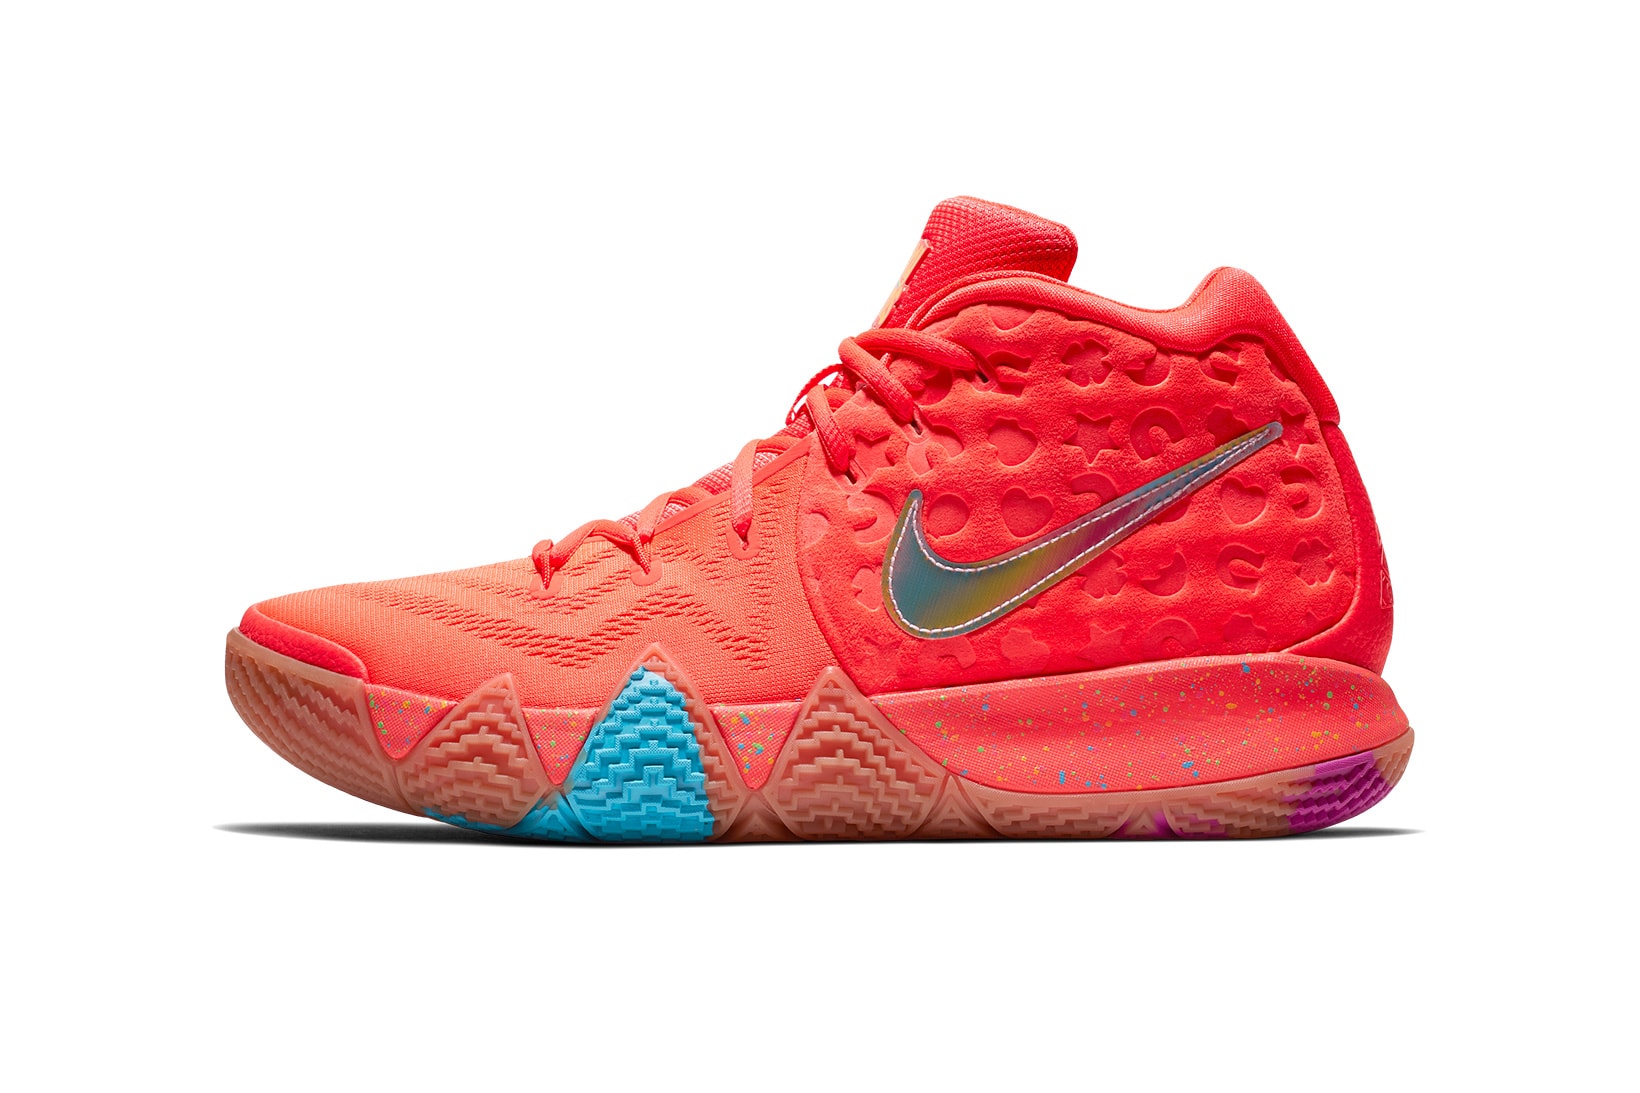 Nike Kyrie 4 Cereal Pack Official Look & Release